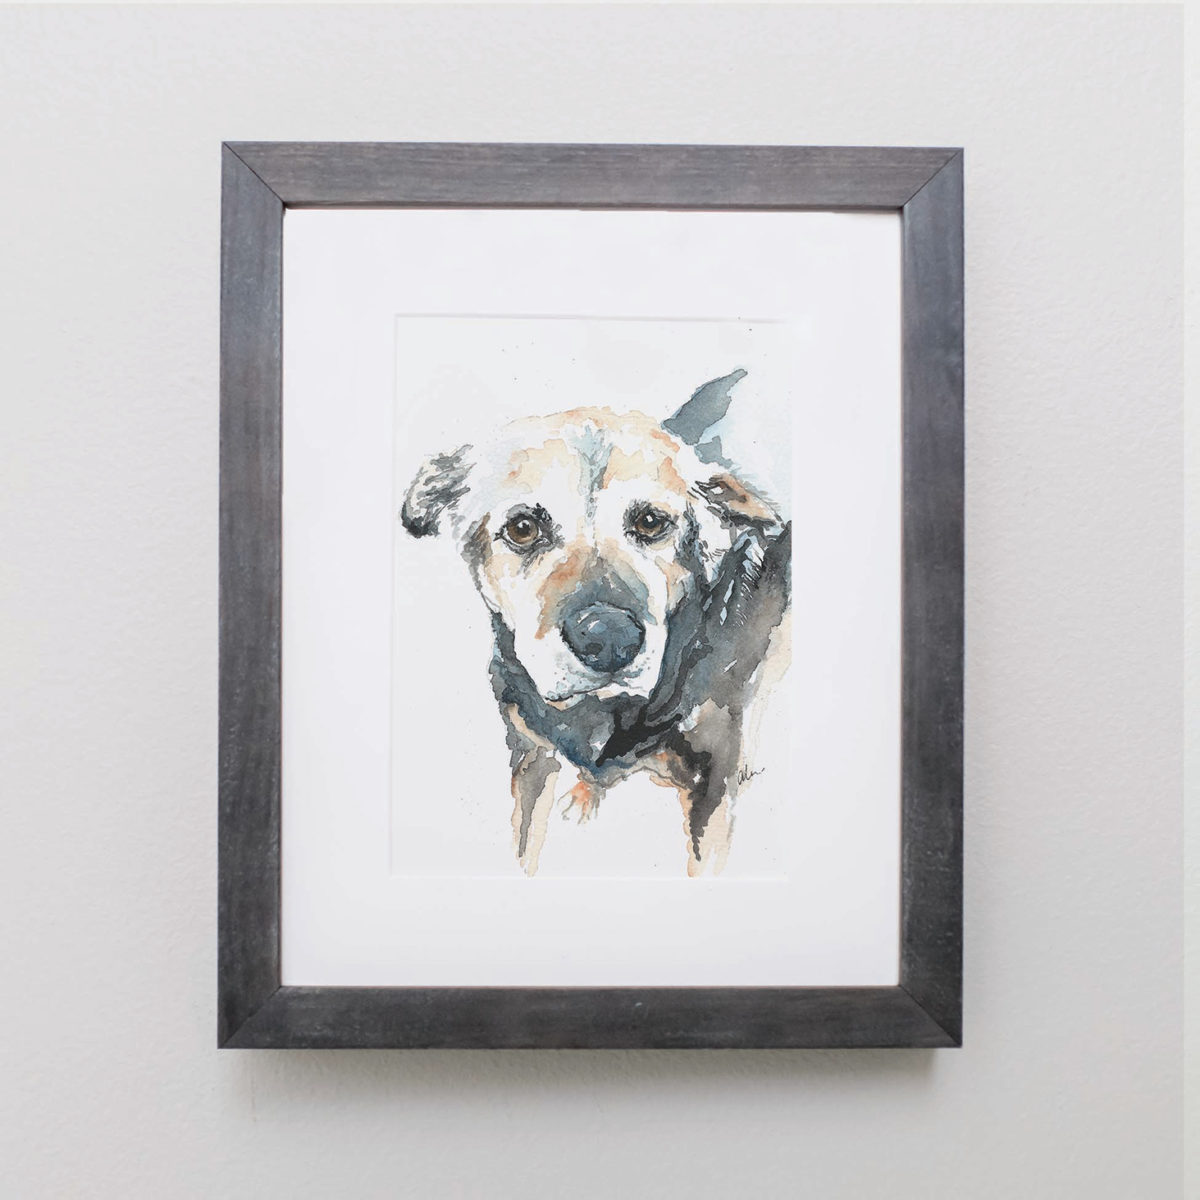 Watercolor of a cream and black dog in a gray frame